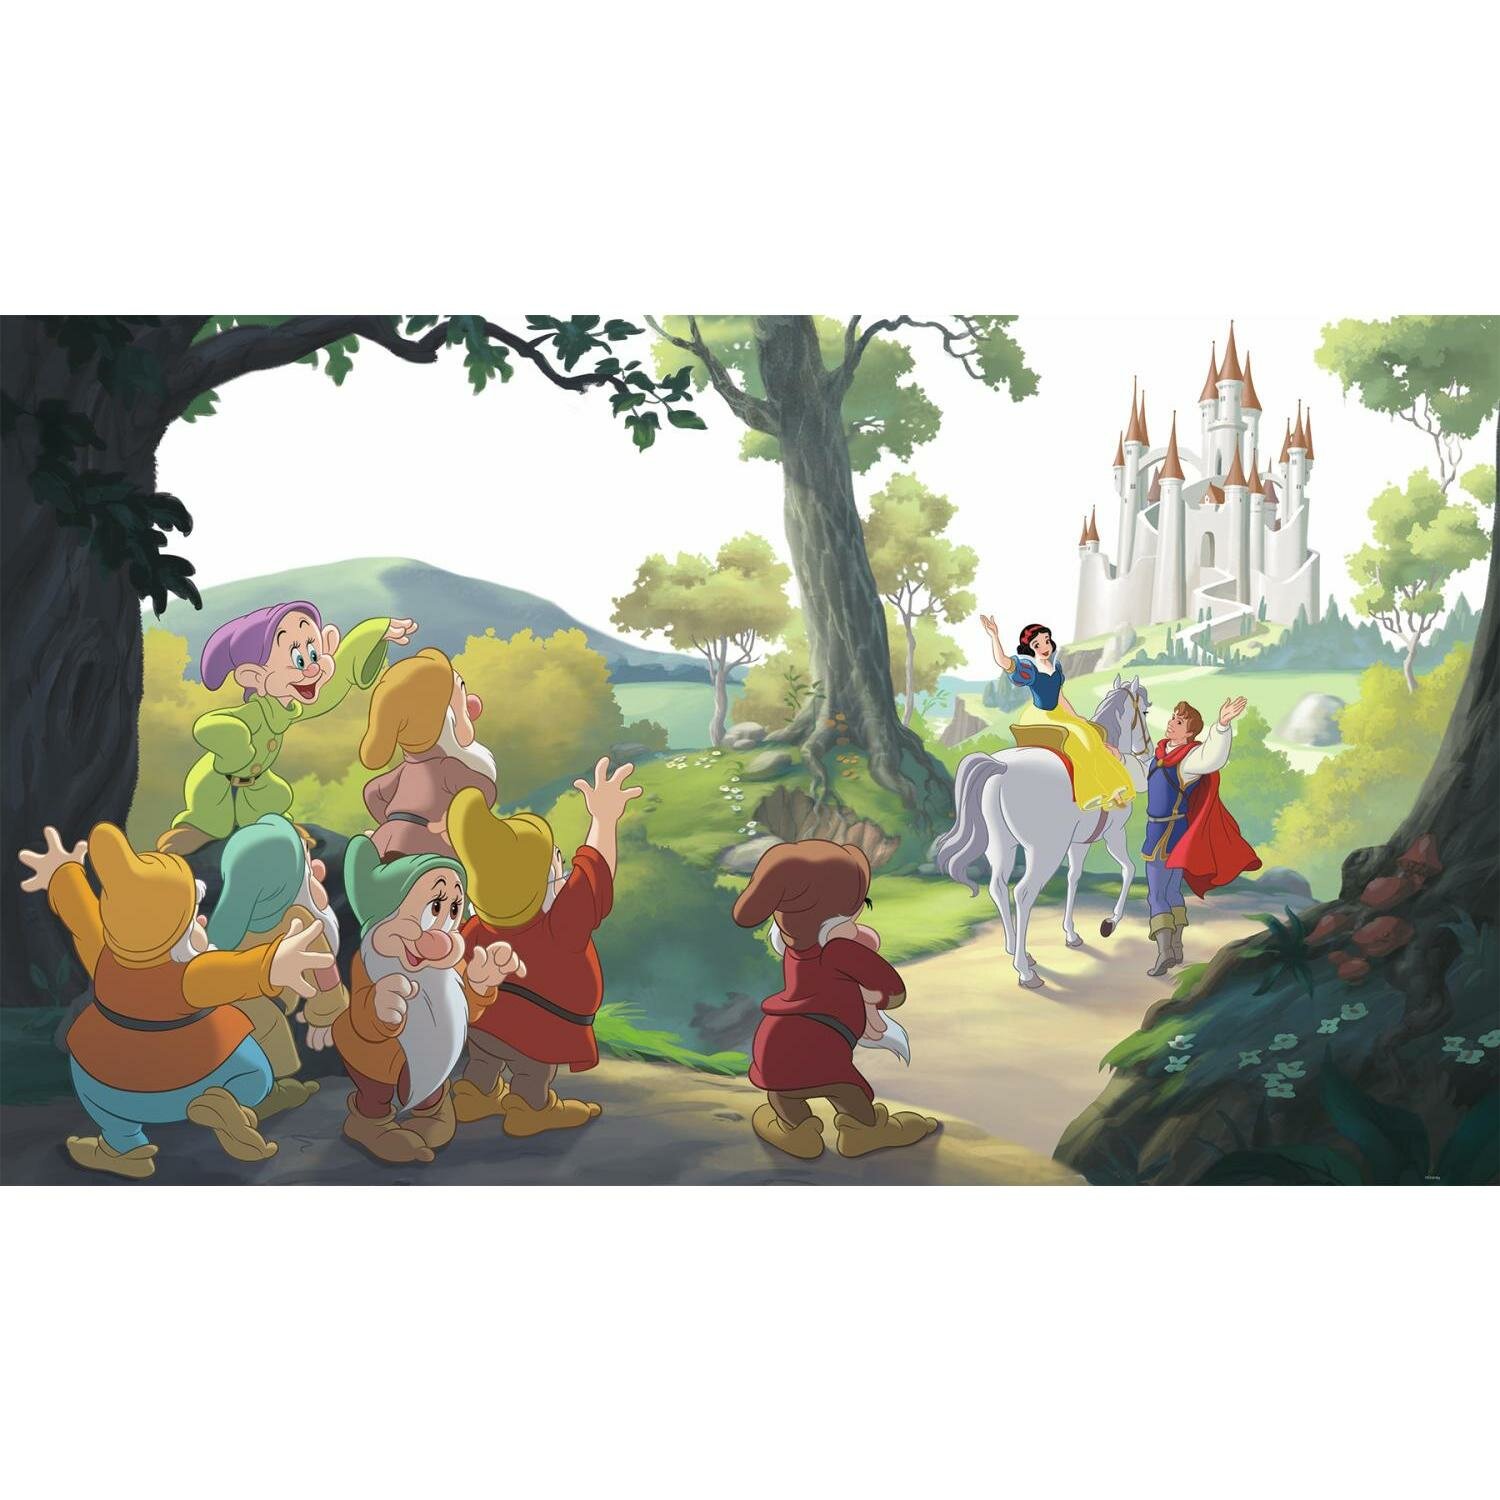 Room Mates Disney Princess Snow White Happily Ever After Chair Rail 10 5 L X 6 W Wall Mural Wayfair